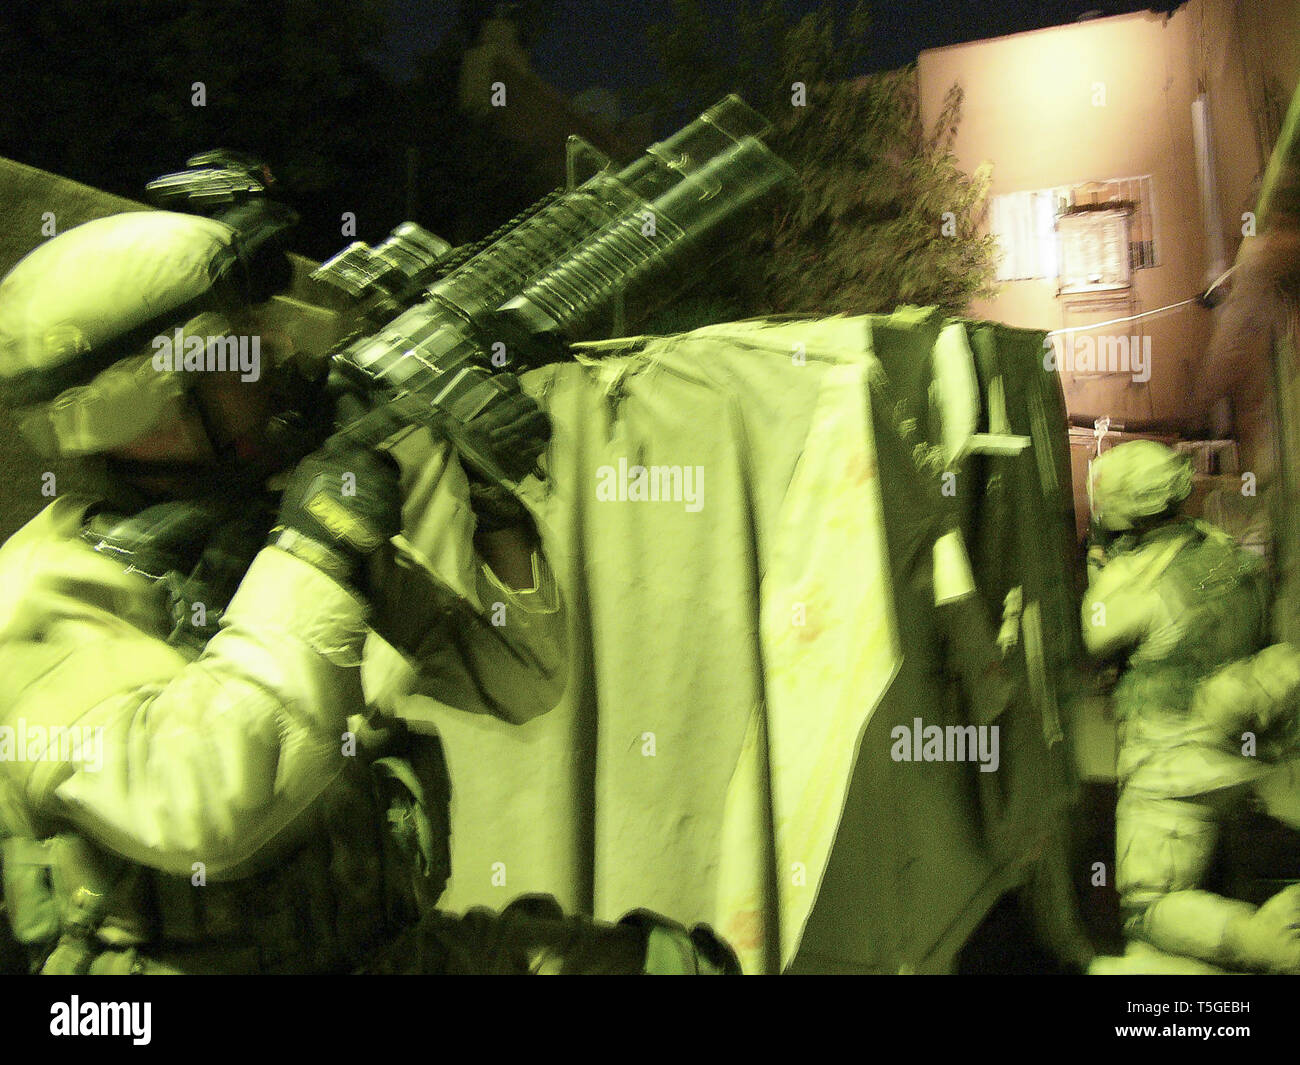 Baghdad, Baghdad, Iraq. 7th Nov, 2004. Soldiers from Charlie Troop, 1st Squadron, 7th Cavalry Regiment cover a house before a raid in Baghdad Nov. 7, 2004. The troop later detained two men who tested positive for recent exposure to explosive material. Credit: Bill Putnam/ZUMA Wire/Alamy Live News Stock Photo